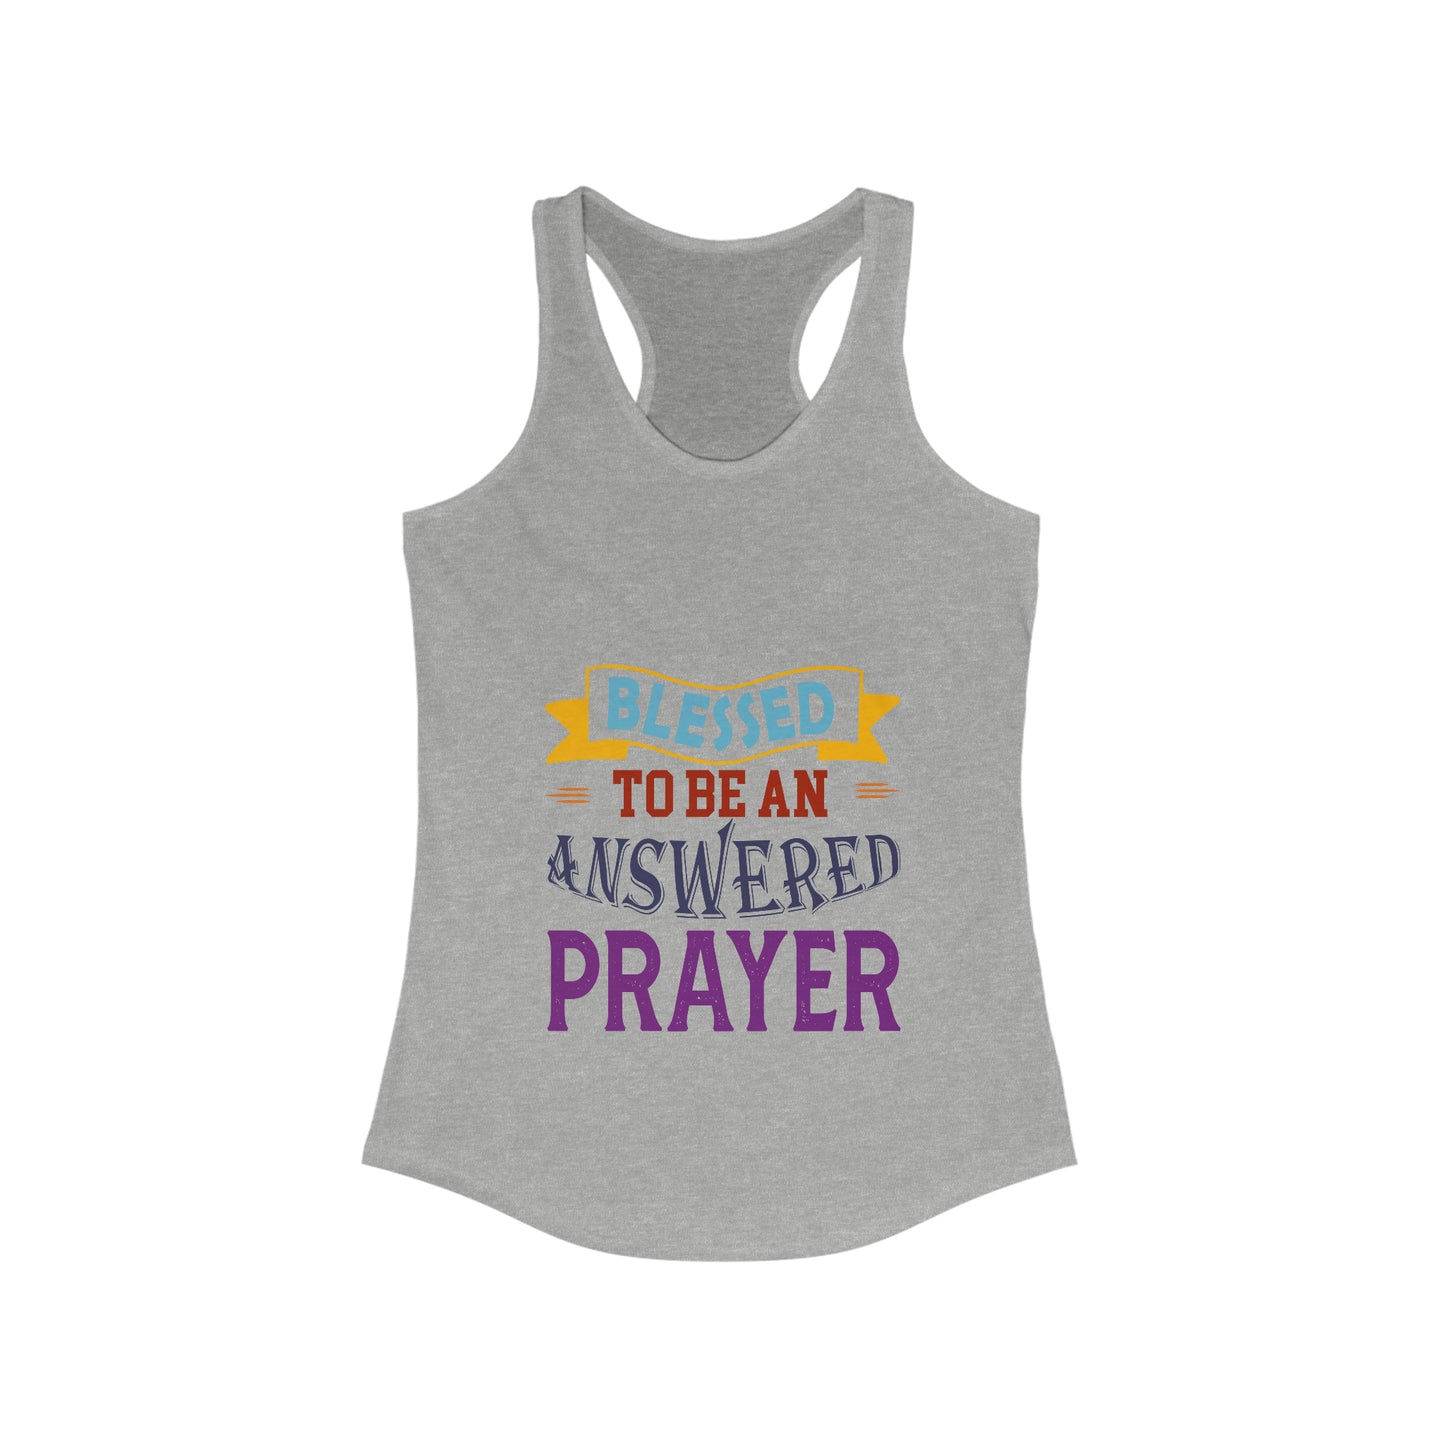 Blessed To Be An Answered Prayer Women’s Slim fit tank-top